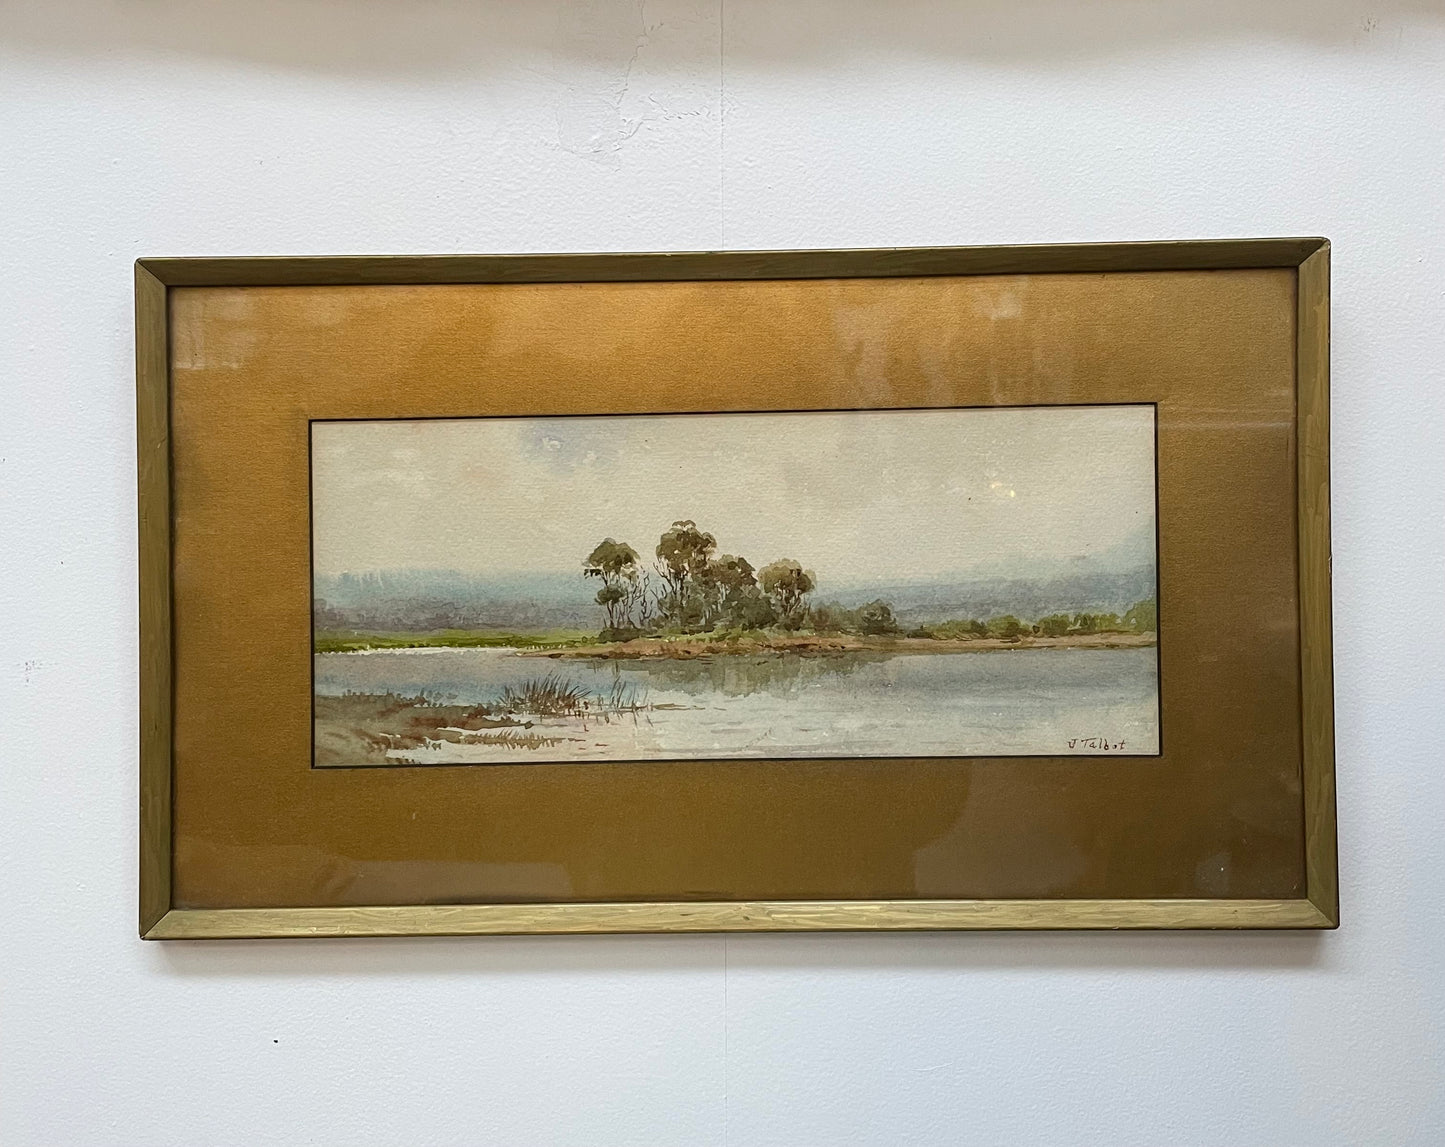 Framed Signed Watercolor of a Country Landscape